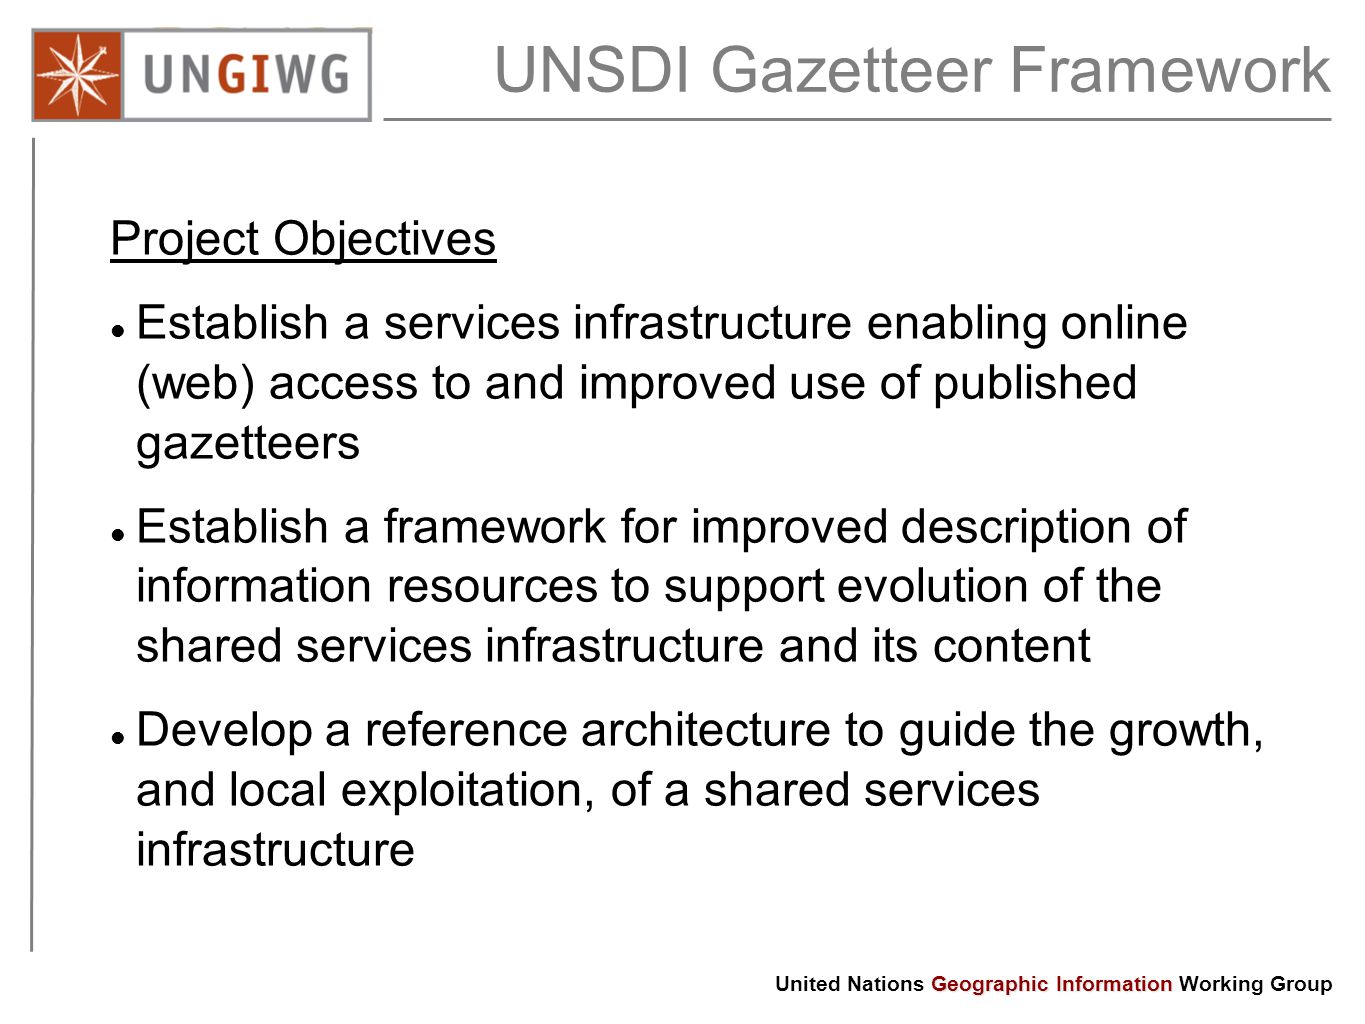 Geographic Information United Nations Geographic Information Working Group UNSDI Gazetteer Framework Project Objectives Establish a services infrastructure enabling online (web) access to and improved use of published gazetteers Establish a framework for improved description of information resources to support evolution of the shared services infrastructure and its content Develop a reference architecture to guide the growth, and local exploitation, of a shared services infrastructure